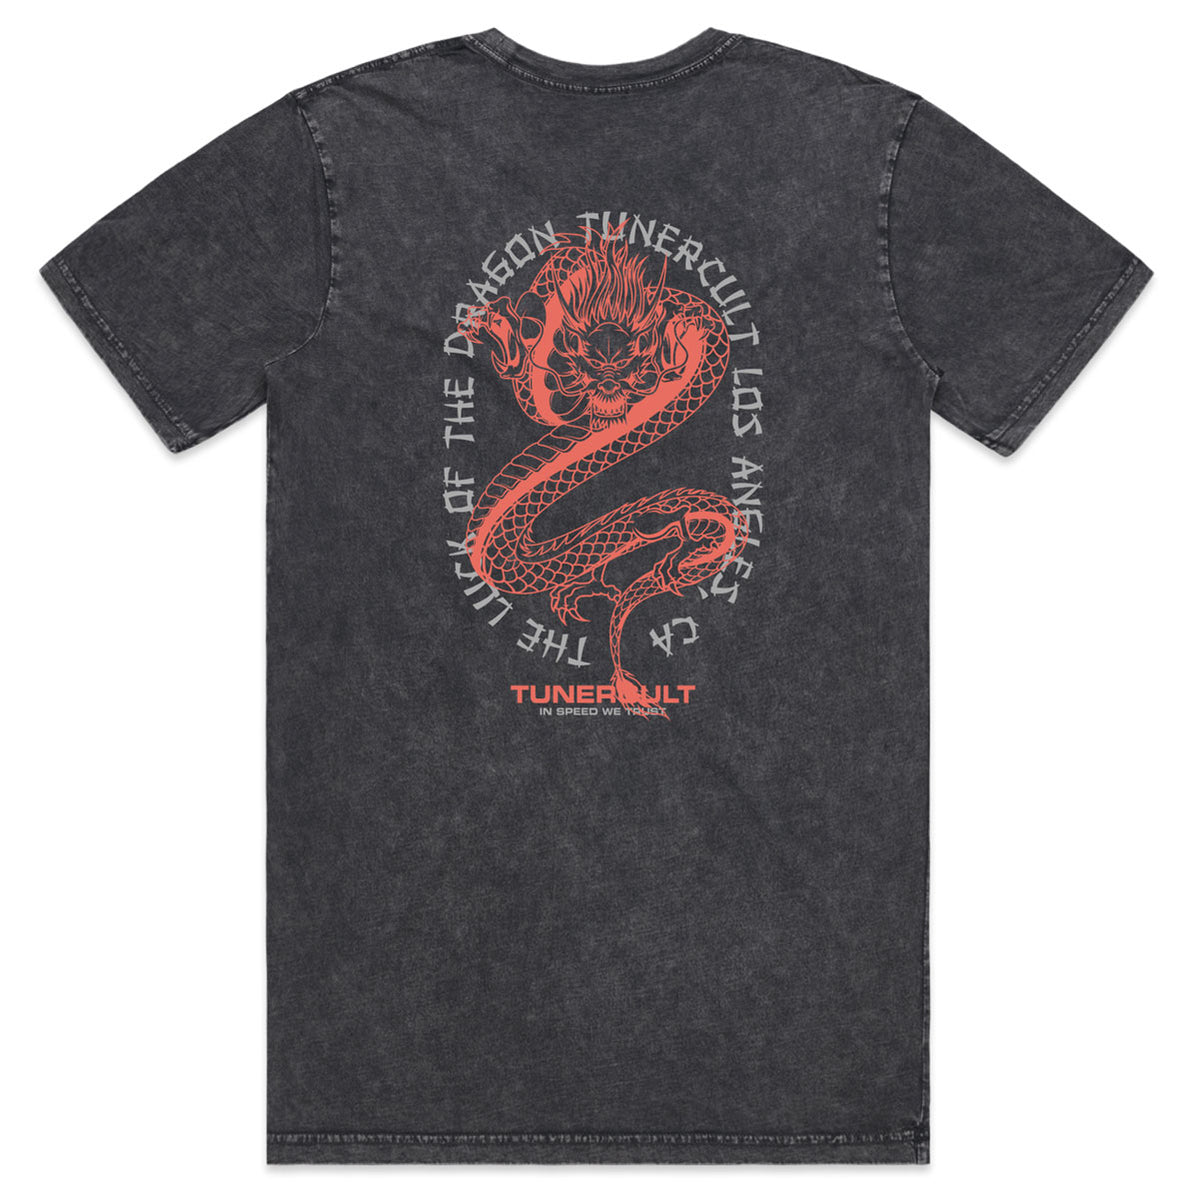 LUCK OF THE DRAGON T-SHIRT